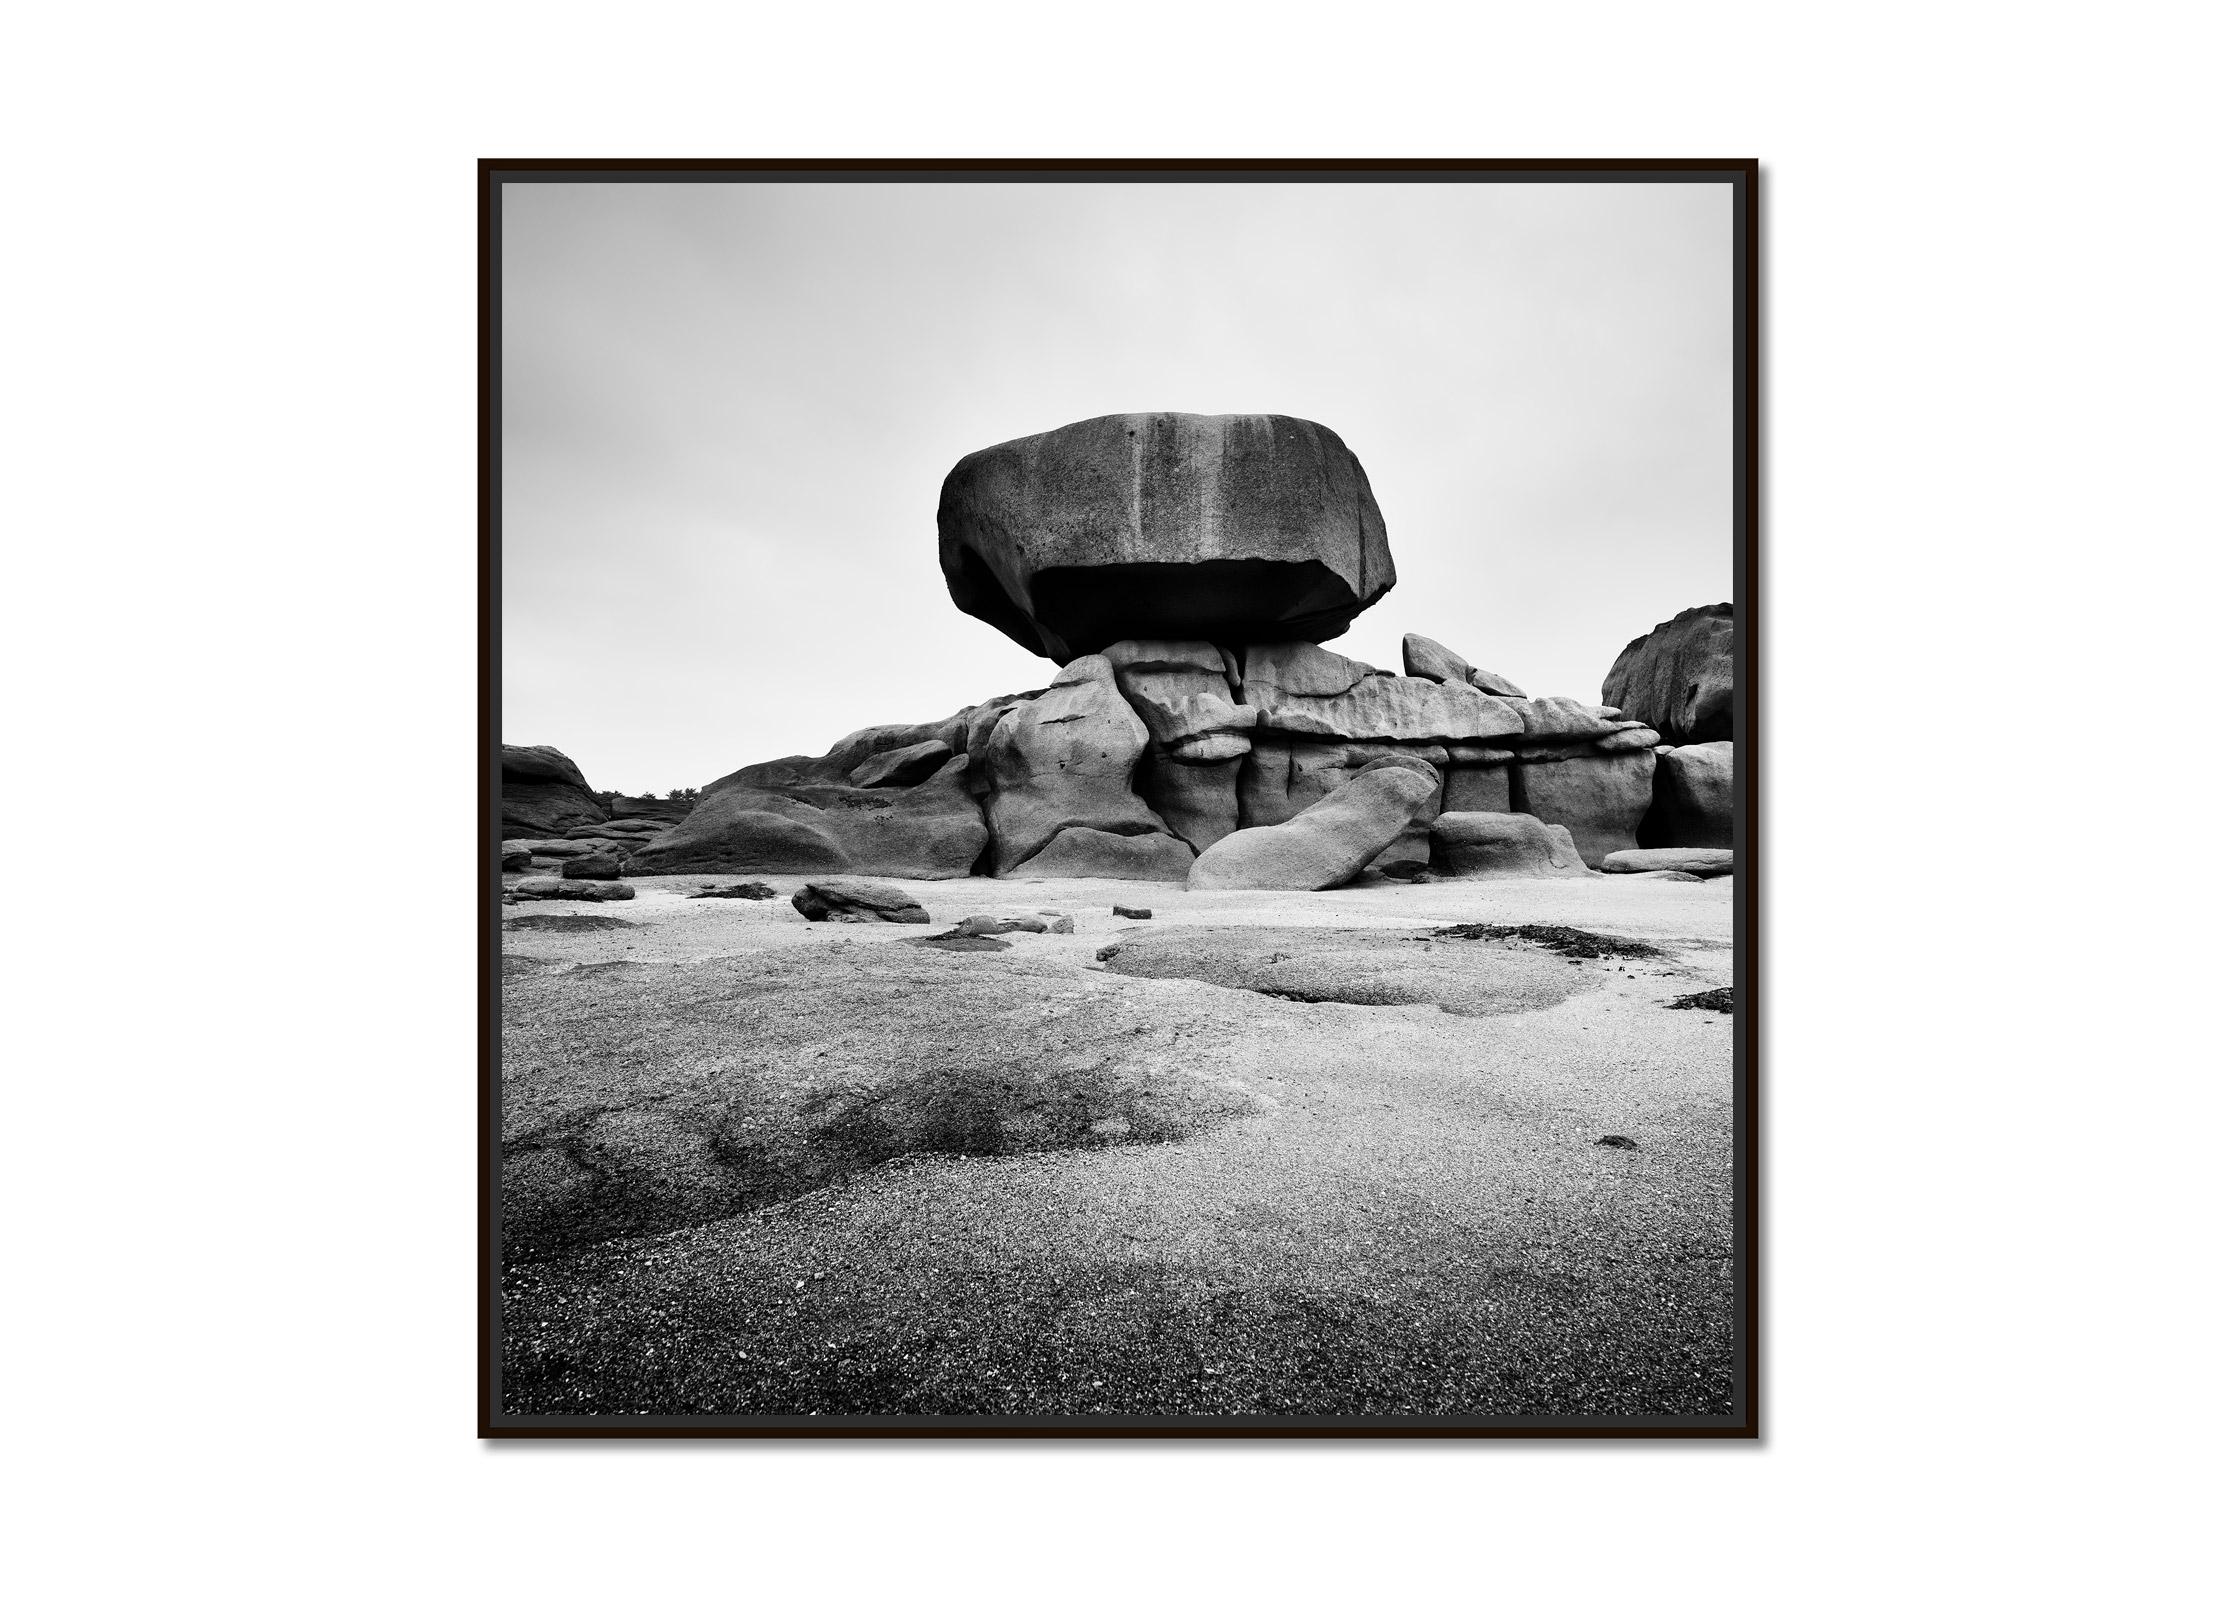 Pink Granite Coast, huge Rock, black and white photography, fine art landscape - Photograph by Gerald Berghammer